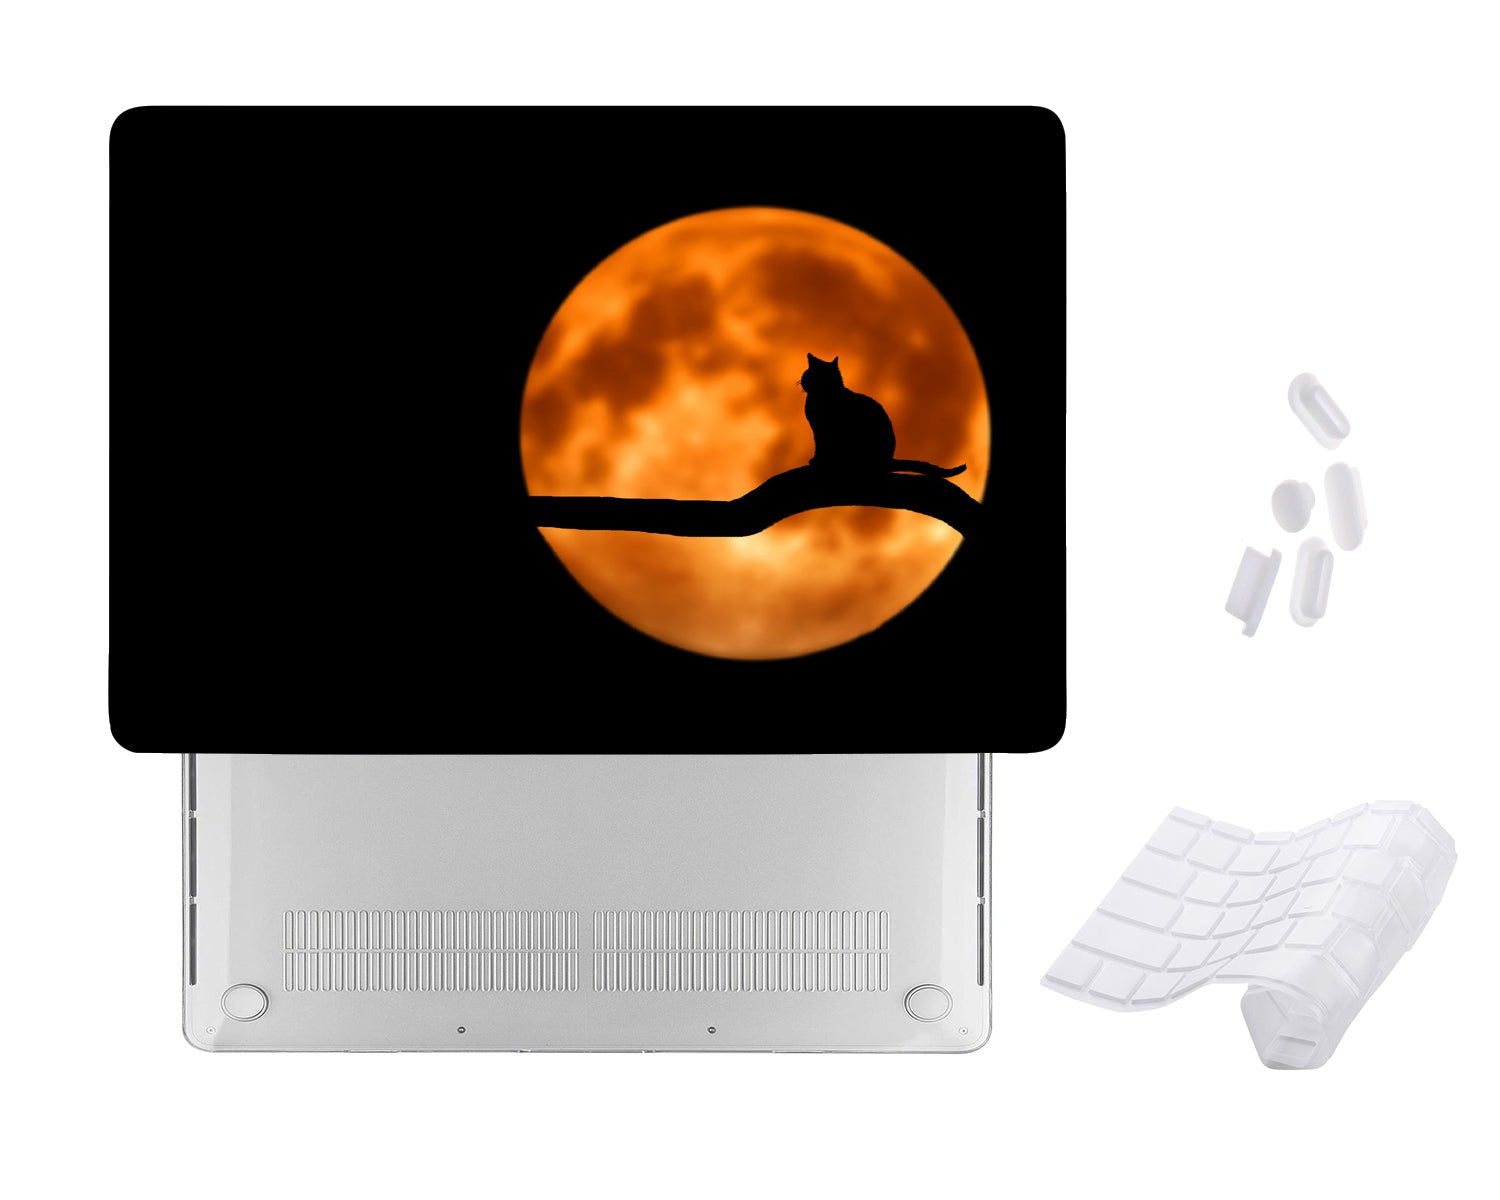 Case Cover for Macbook - Scariest Cat Full Moon Day Design